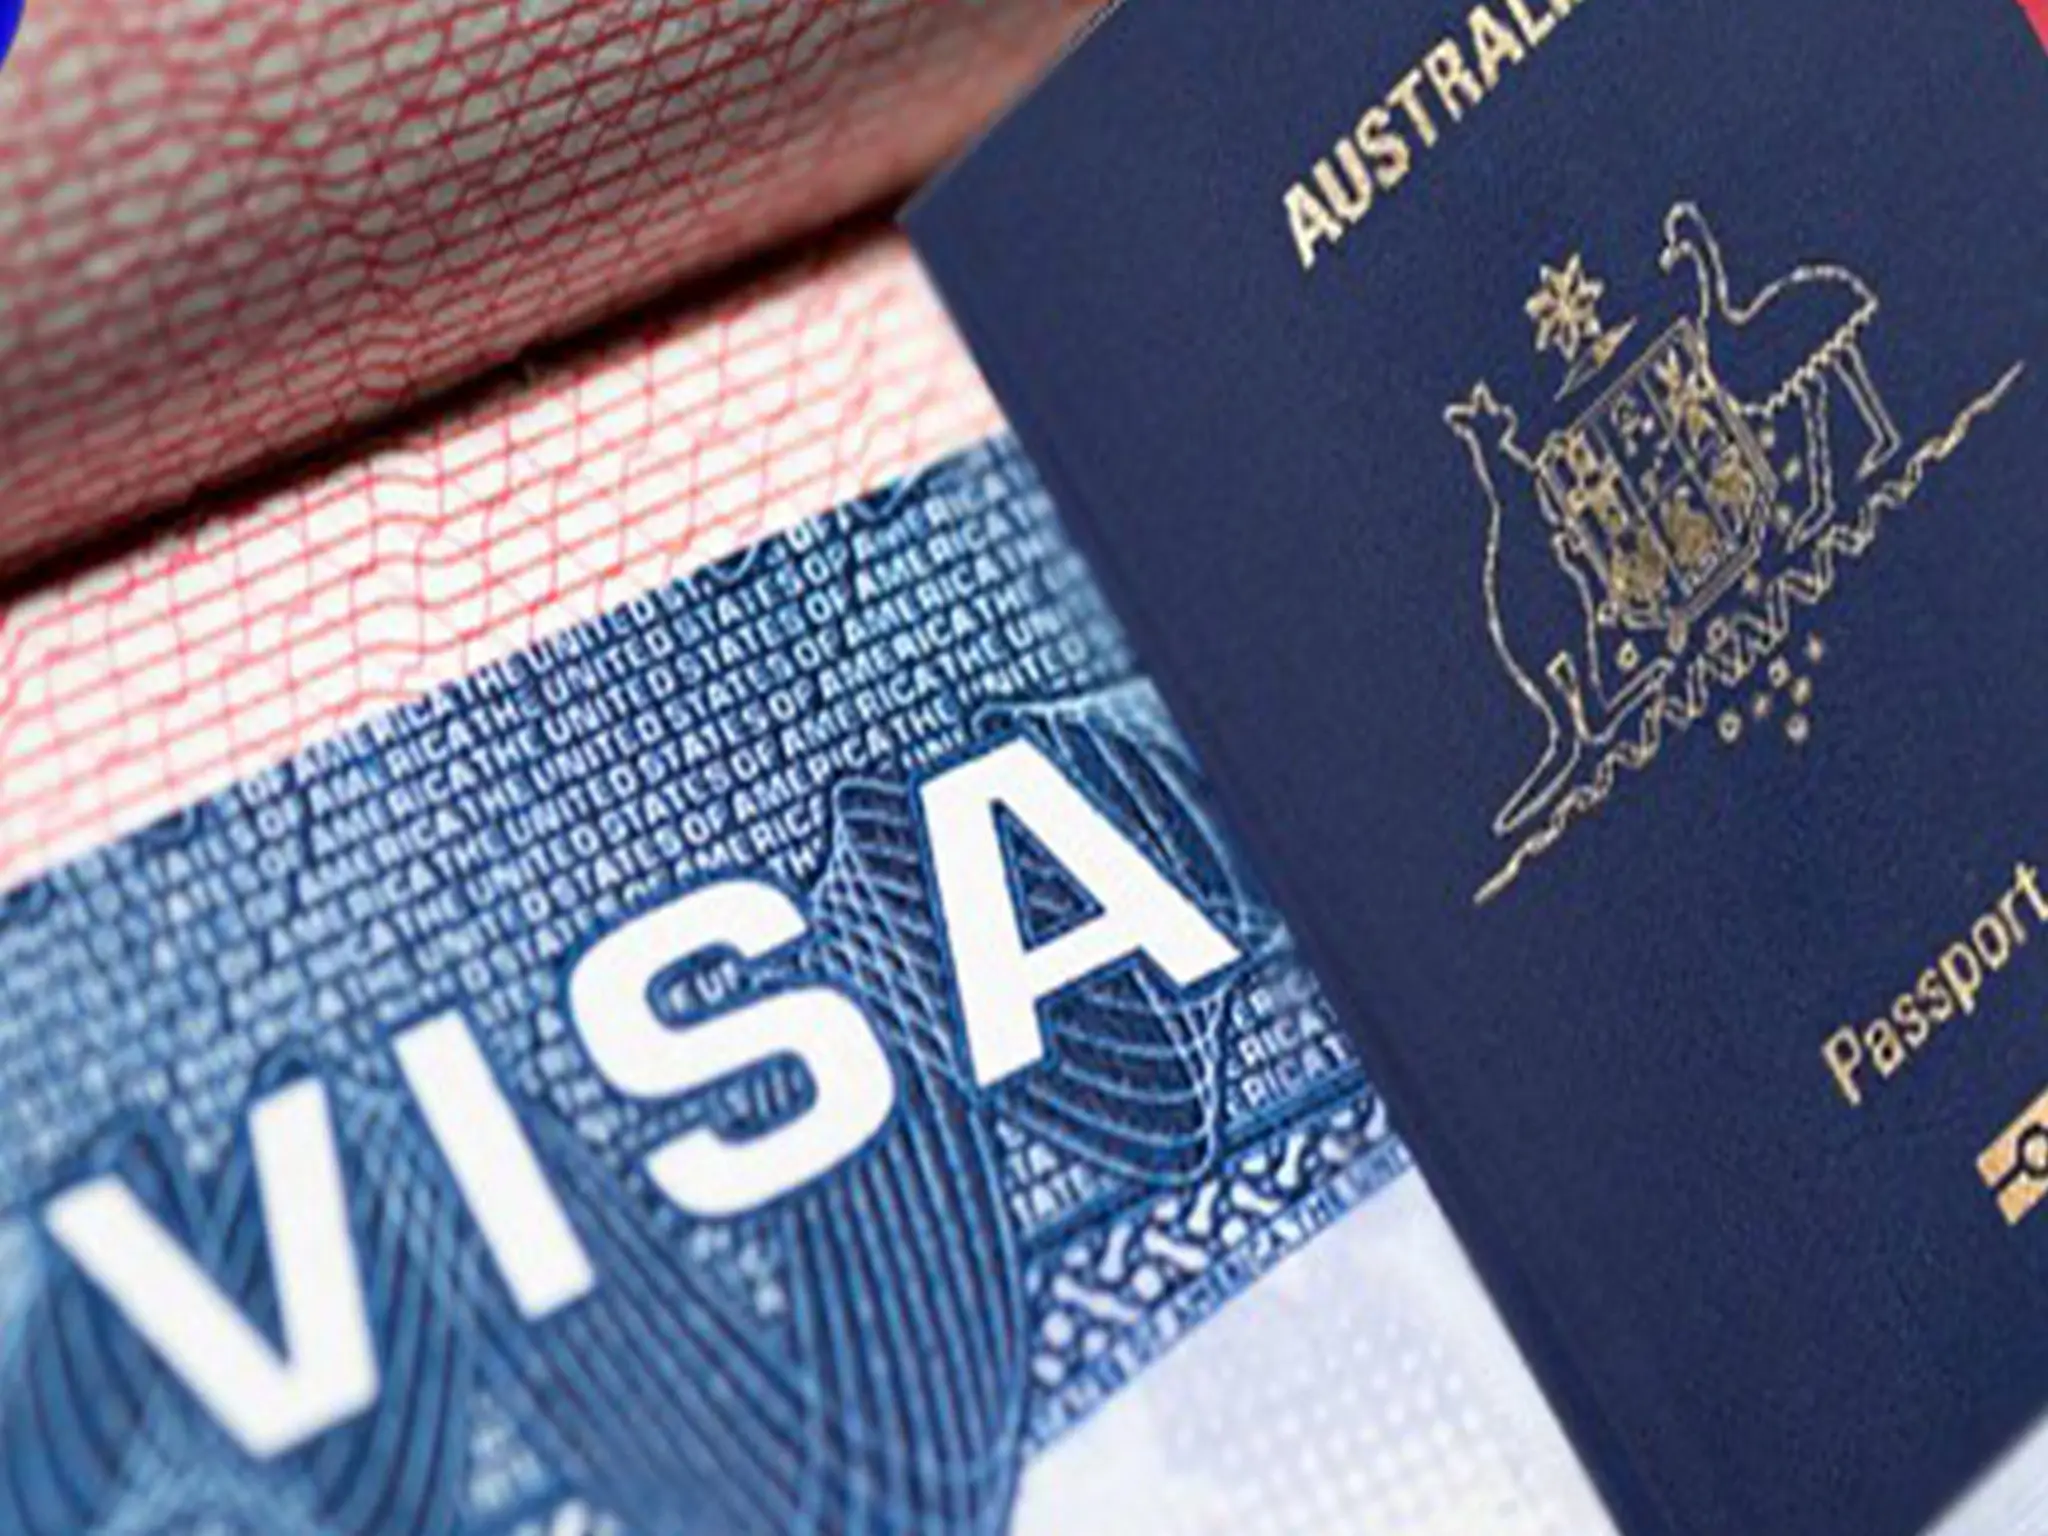 Australia provides a concessional worker visa for the Pacific Islands